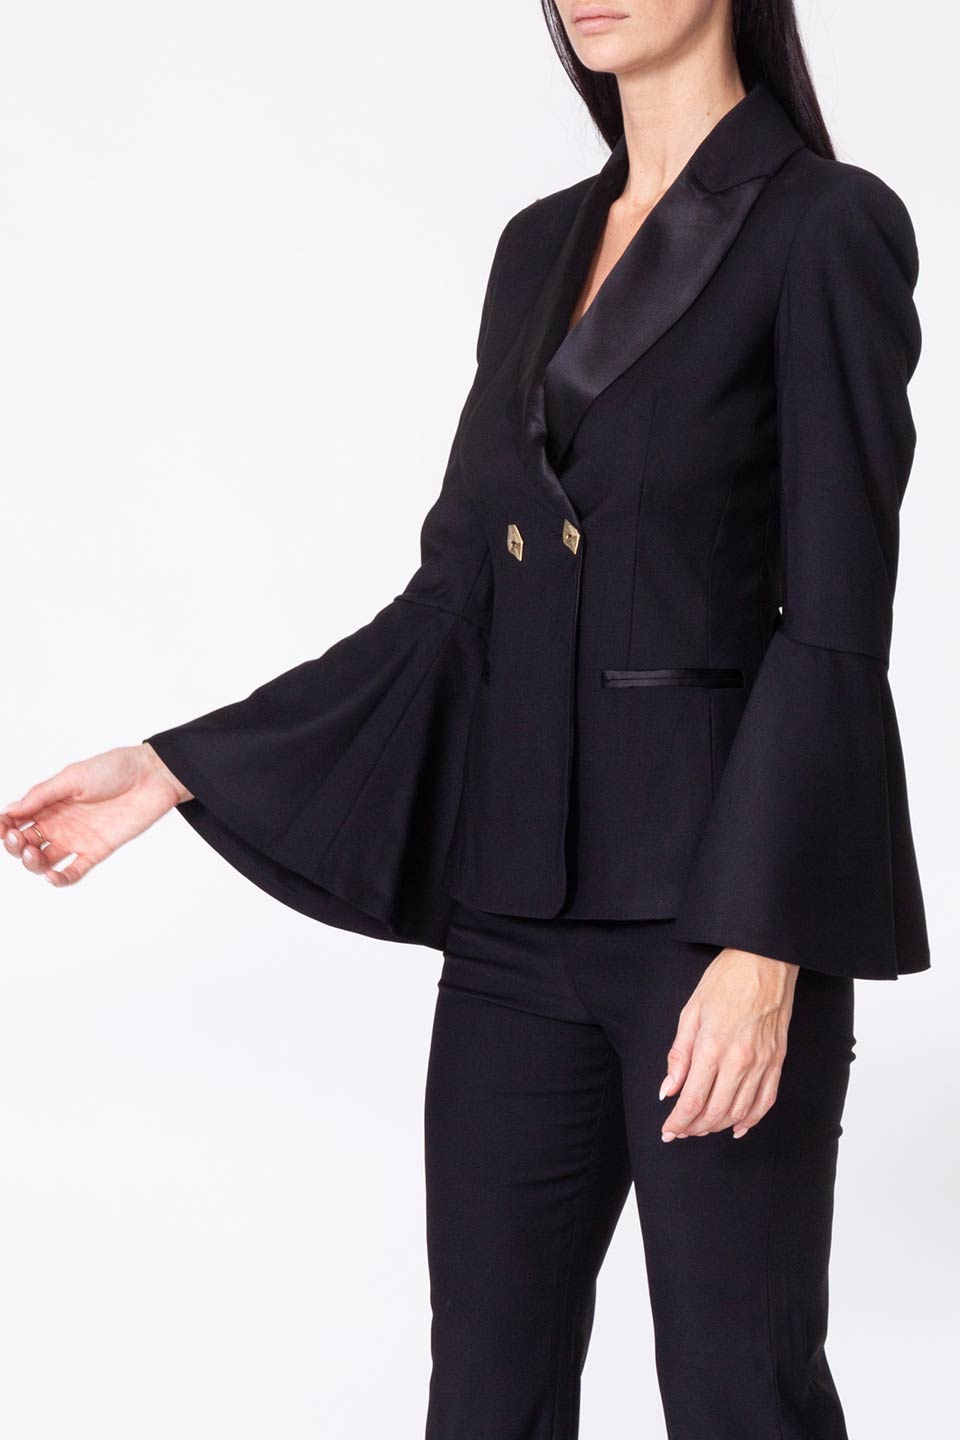 Designer Black Women blazers, shop online with free delivery in UAE. Product gallery 5